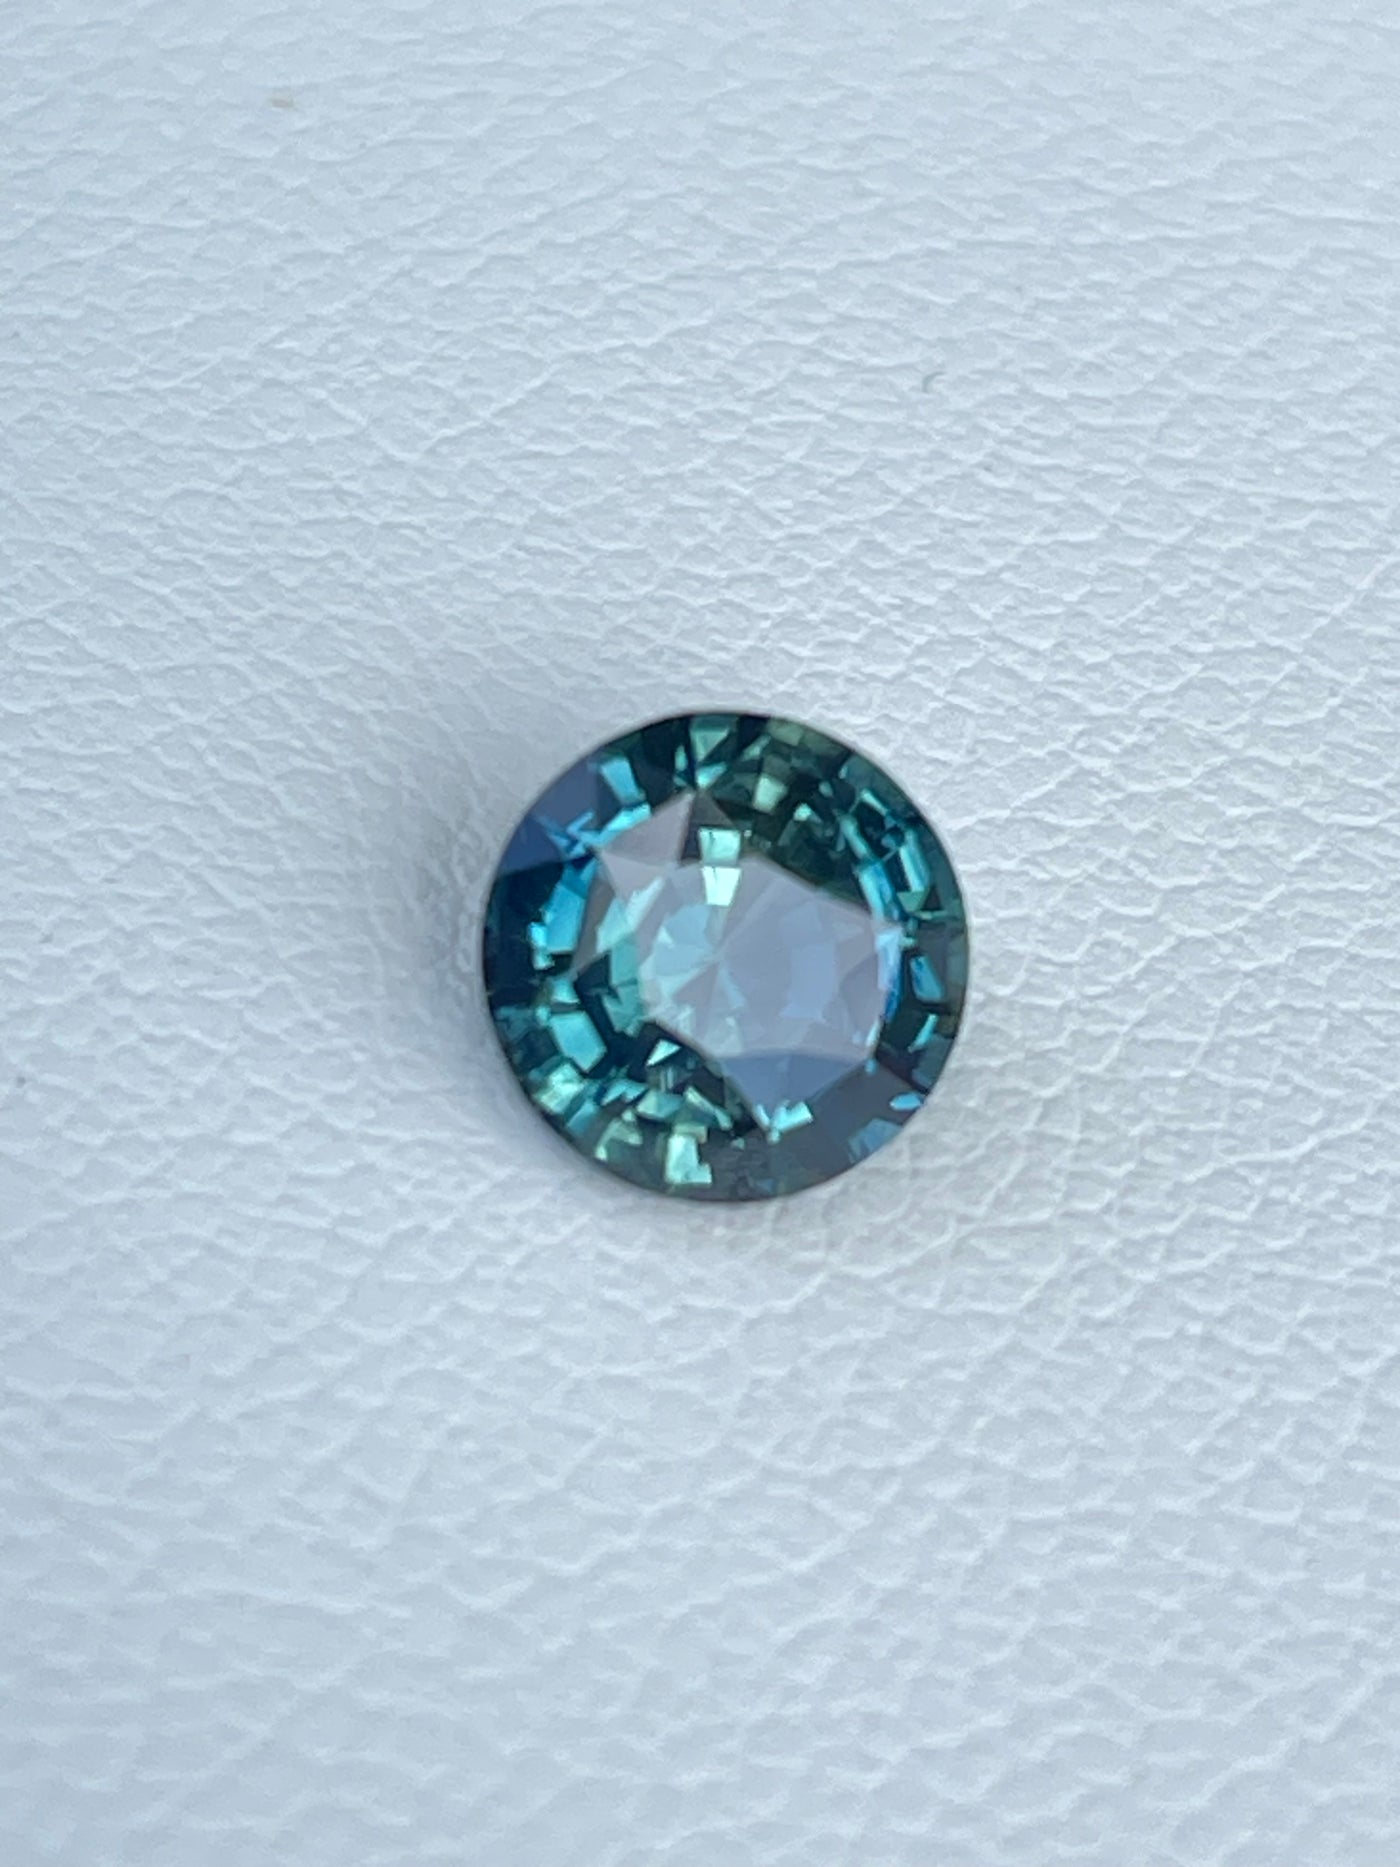 Teal Sapphire 1.48 CT